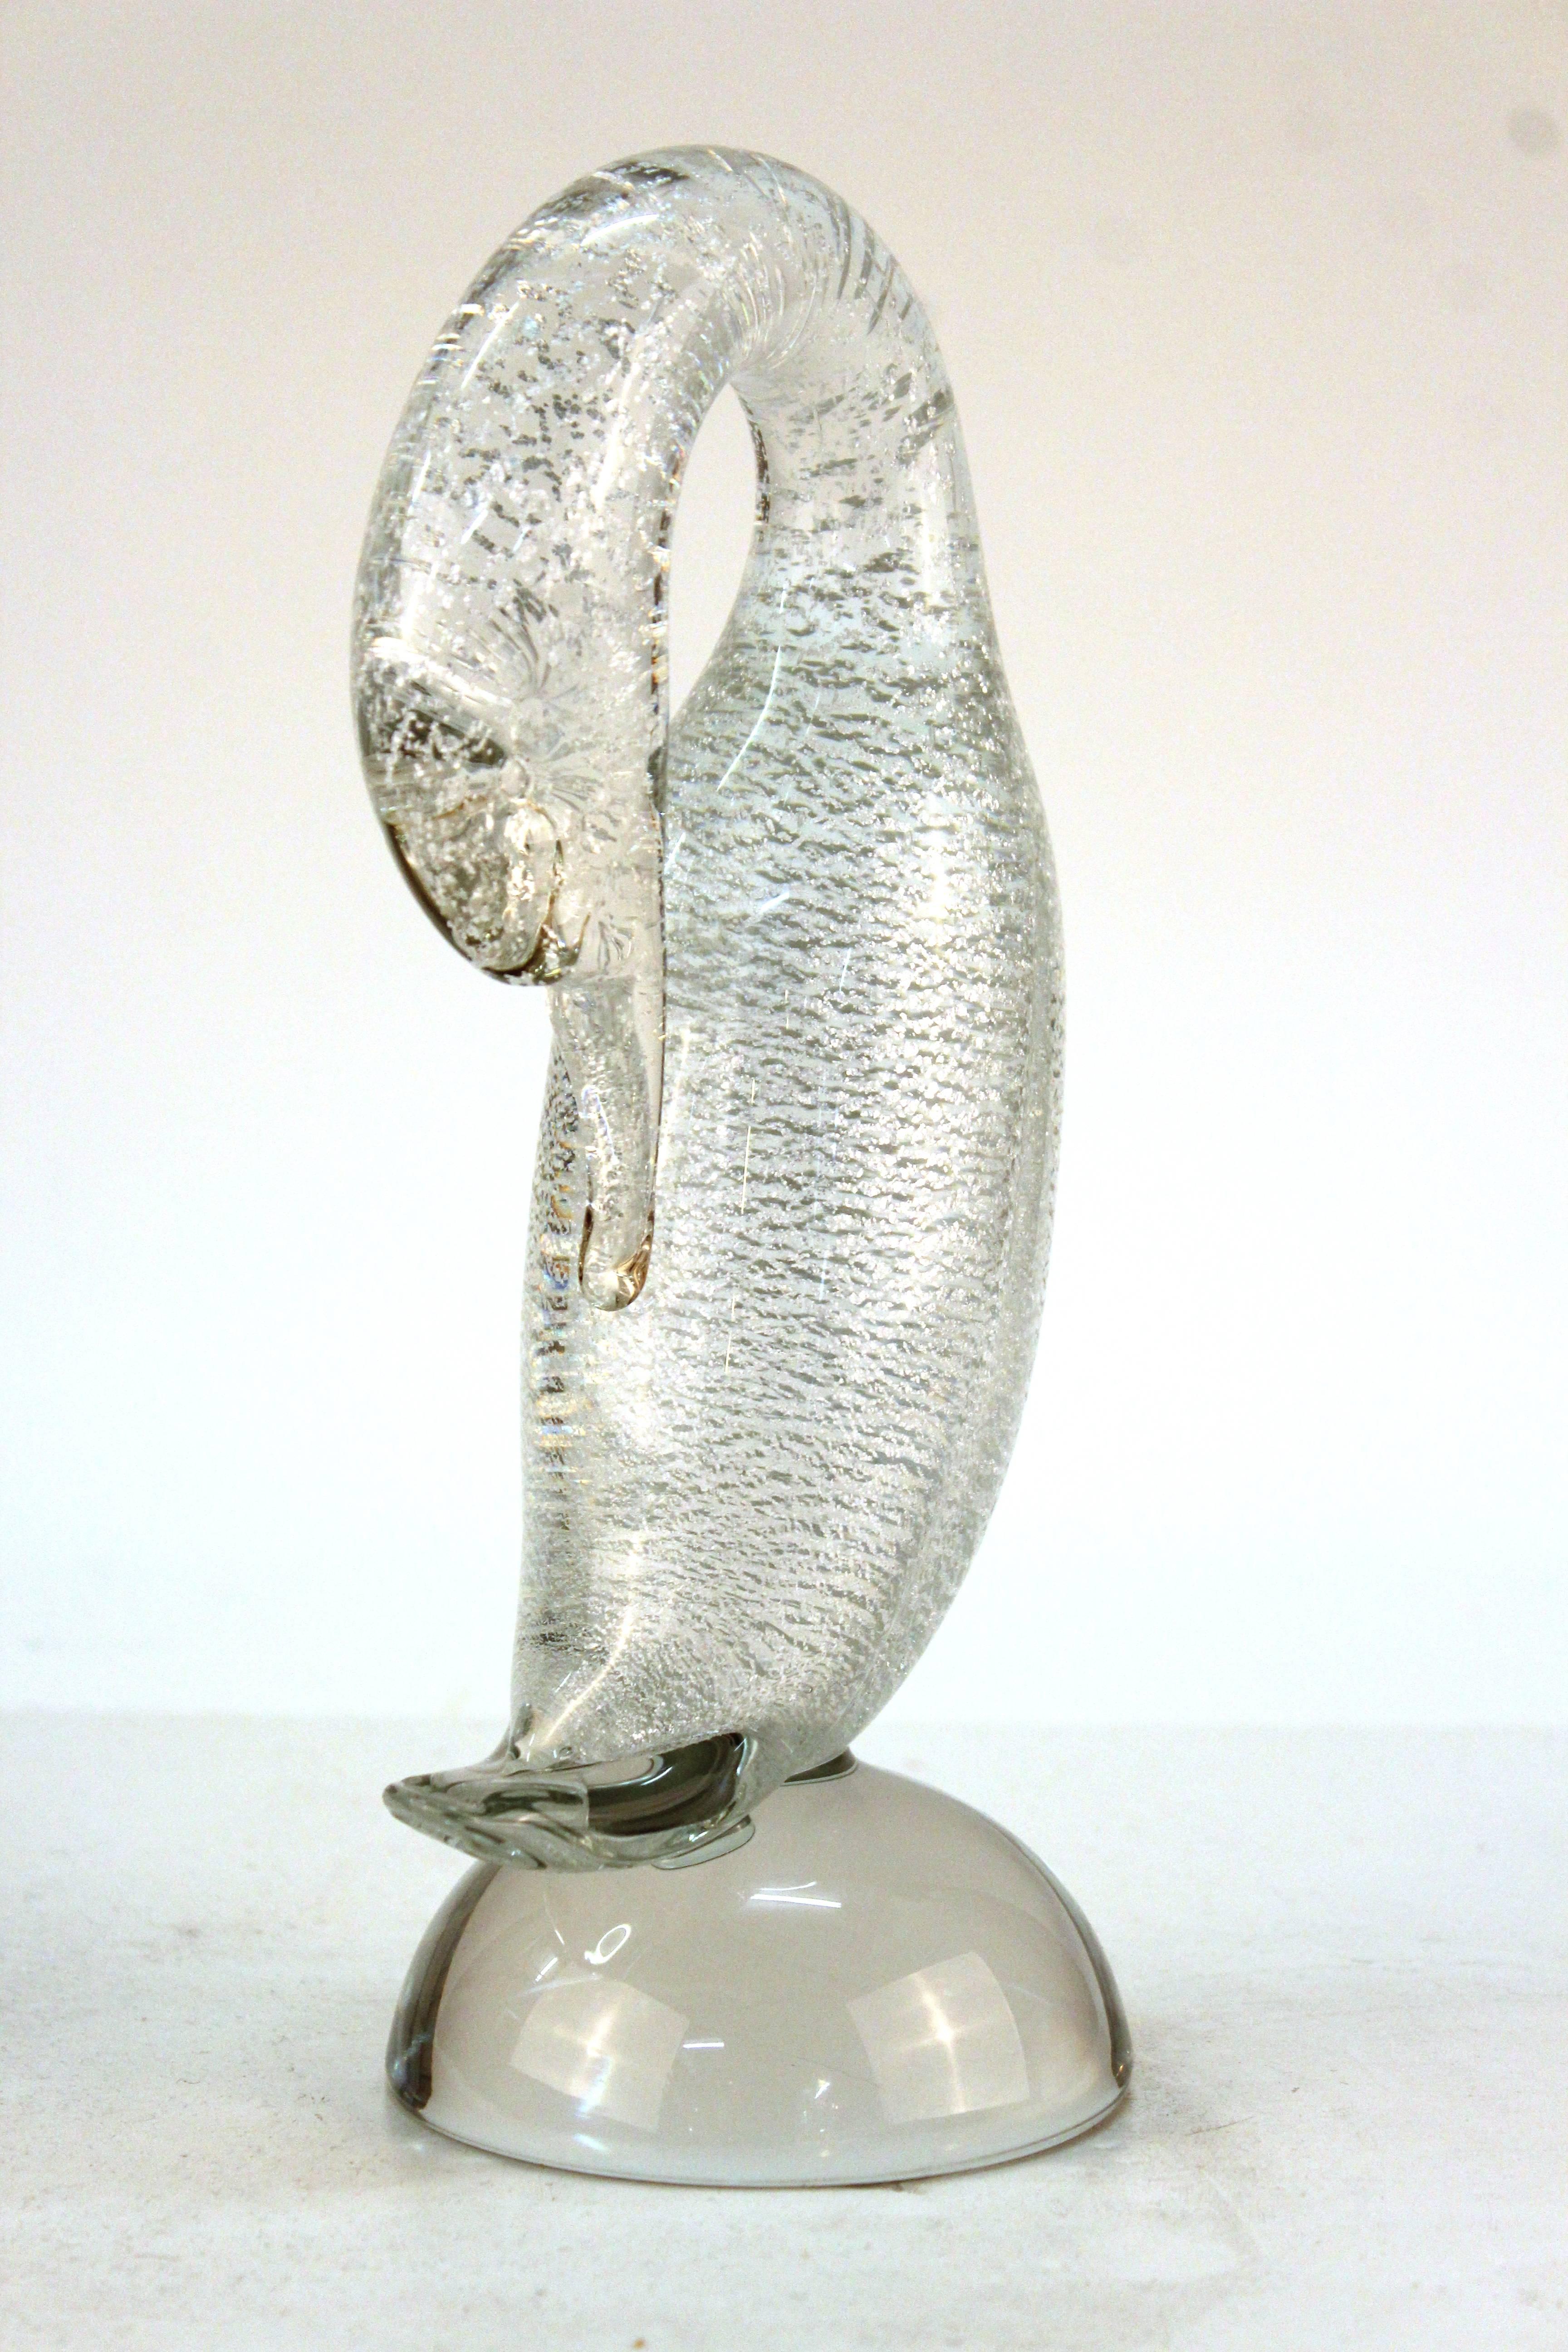 A figure of a goose, made of sculpted Italian Murano glass with white gold fleck inclusions. In good vintage condition.